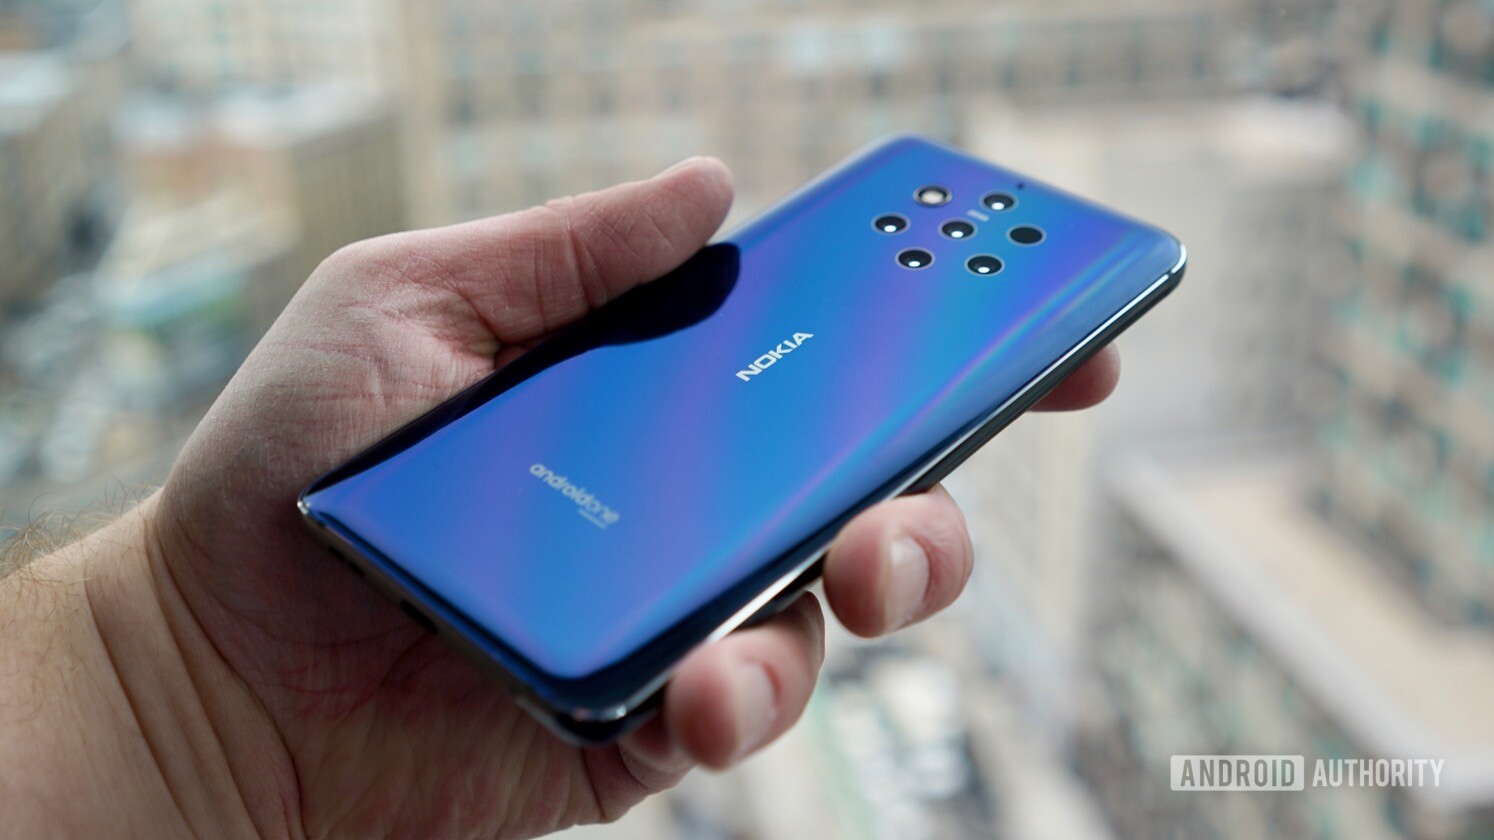 The Nokia 9 PureView smartphone held in a person's hand showing off the back of the device.